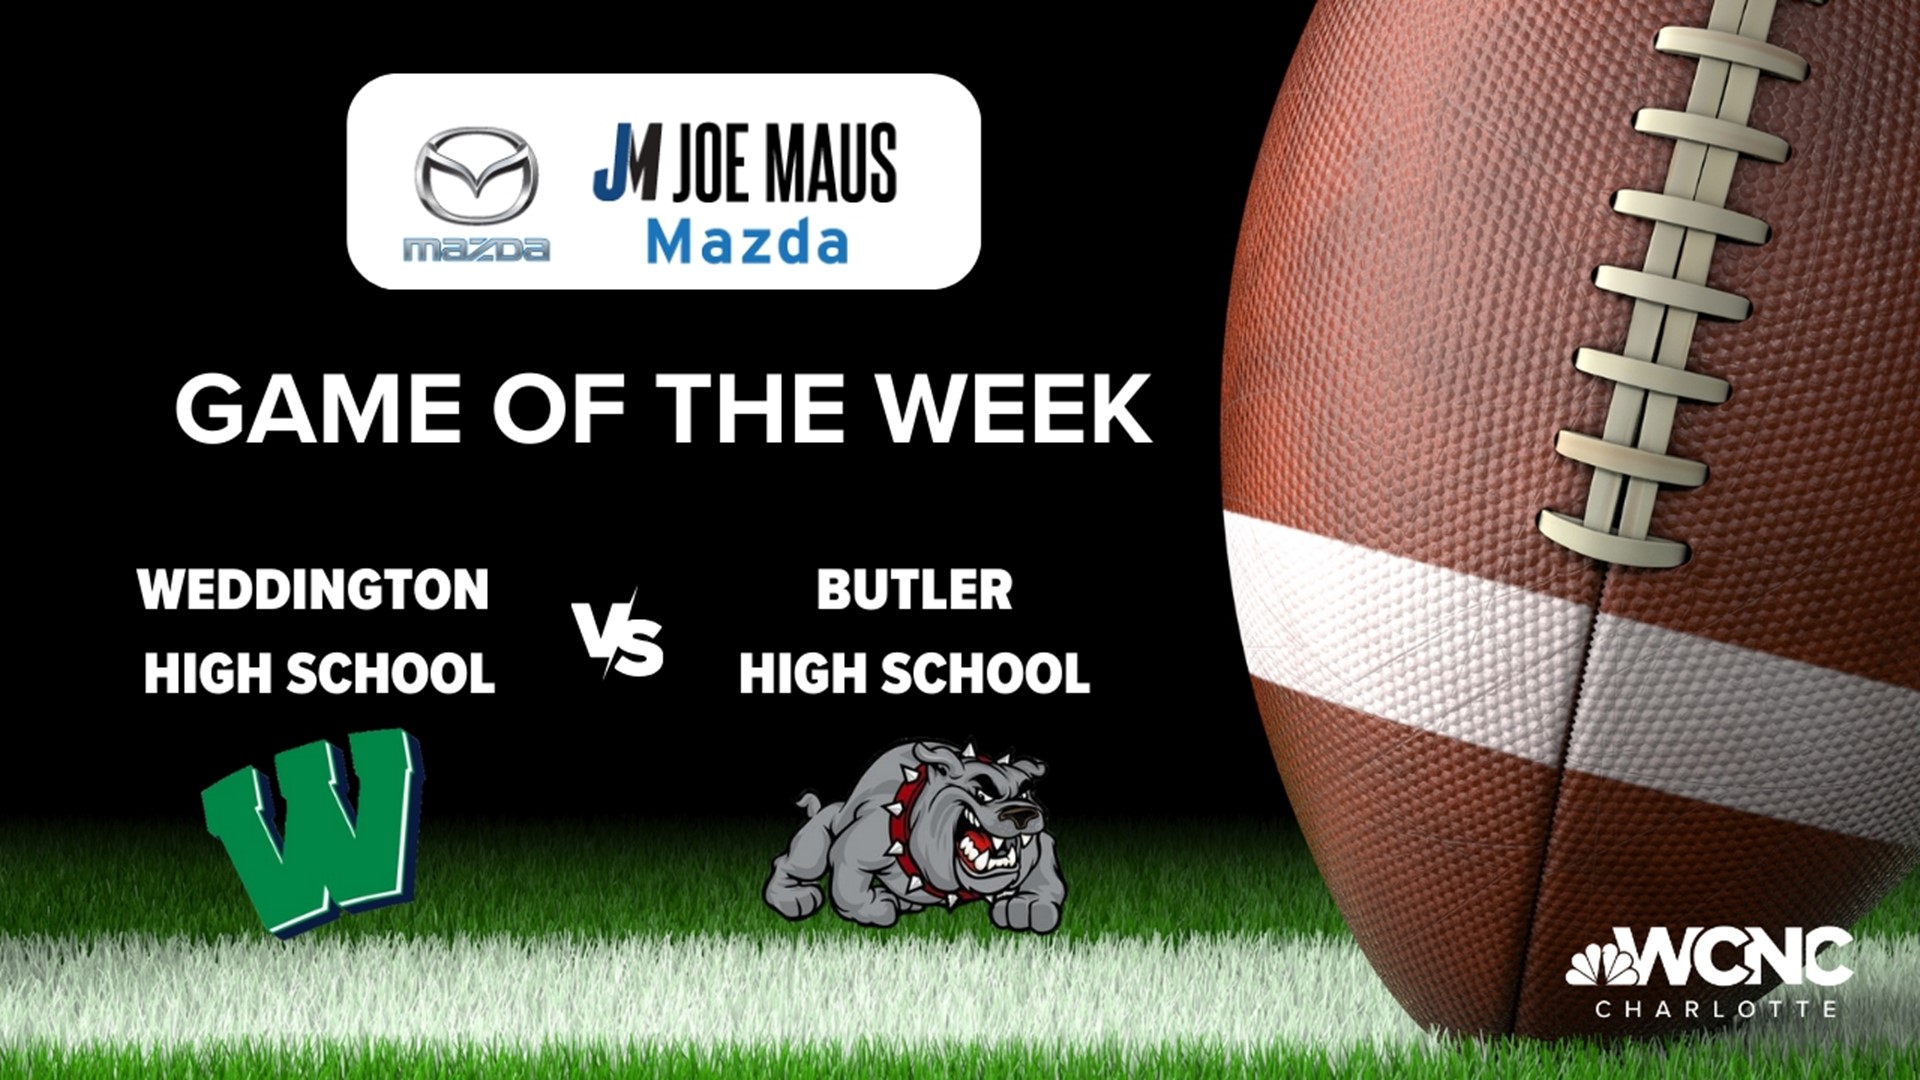 Butler was coming off a huge win against a nationally ranked team going into Friday's game against Weddington. So how'd the Bulldogs fare?